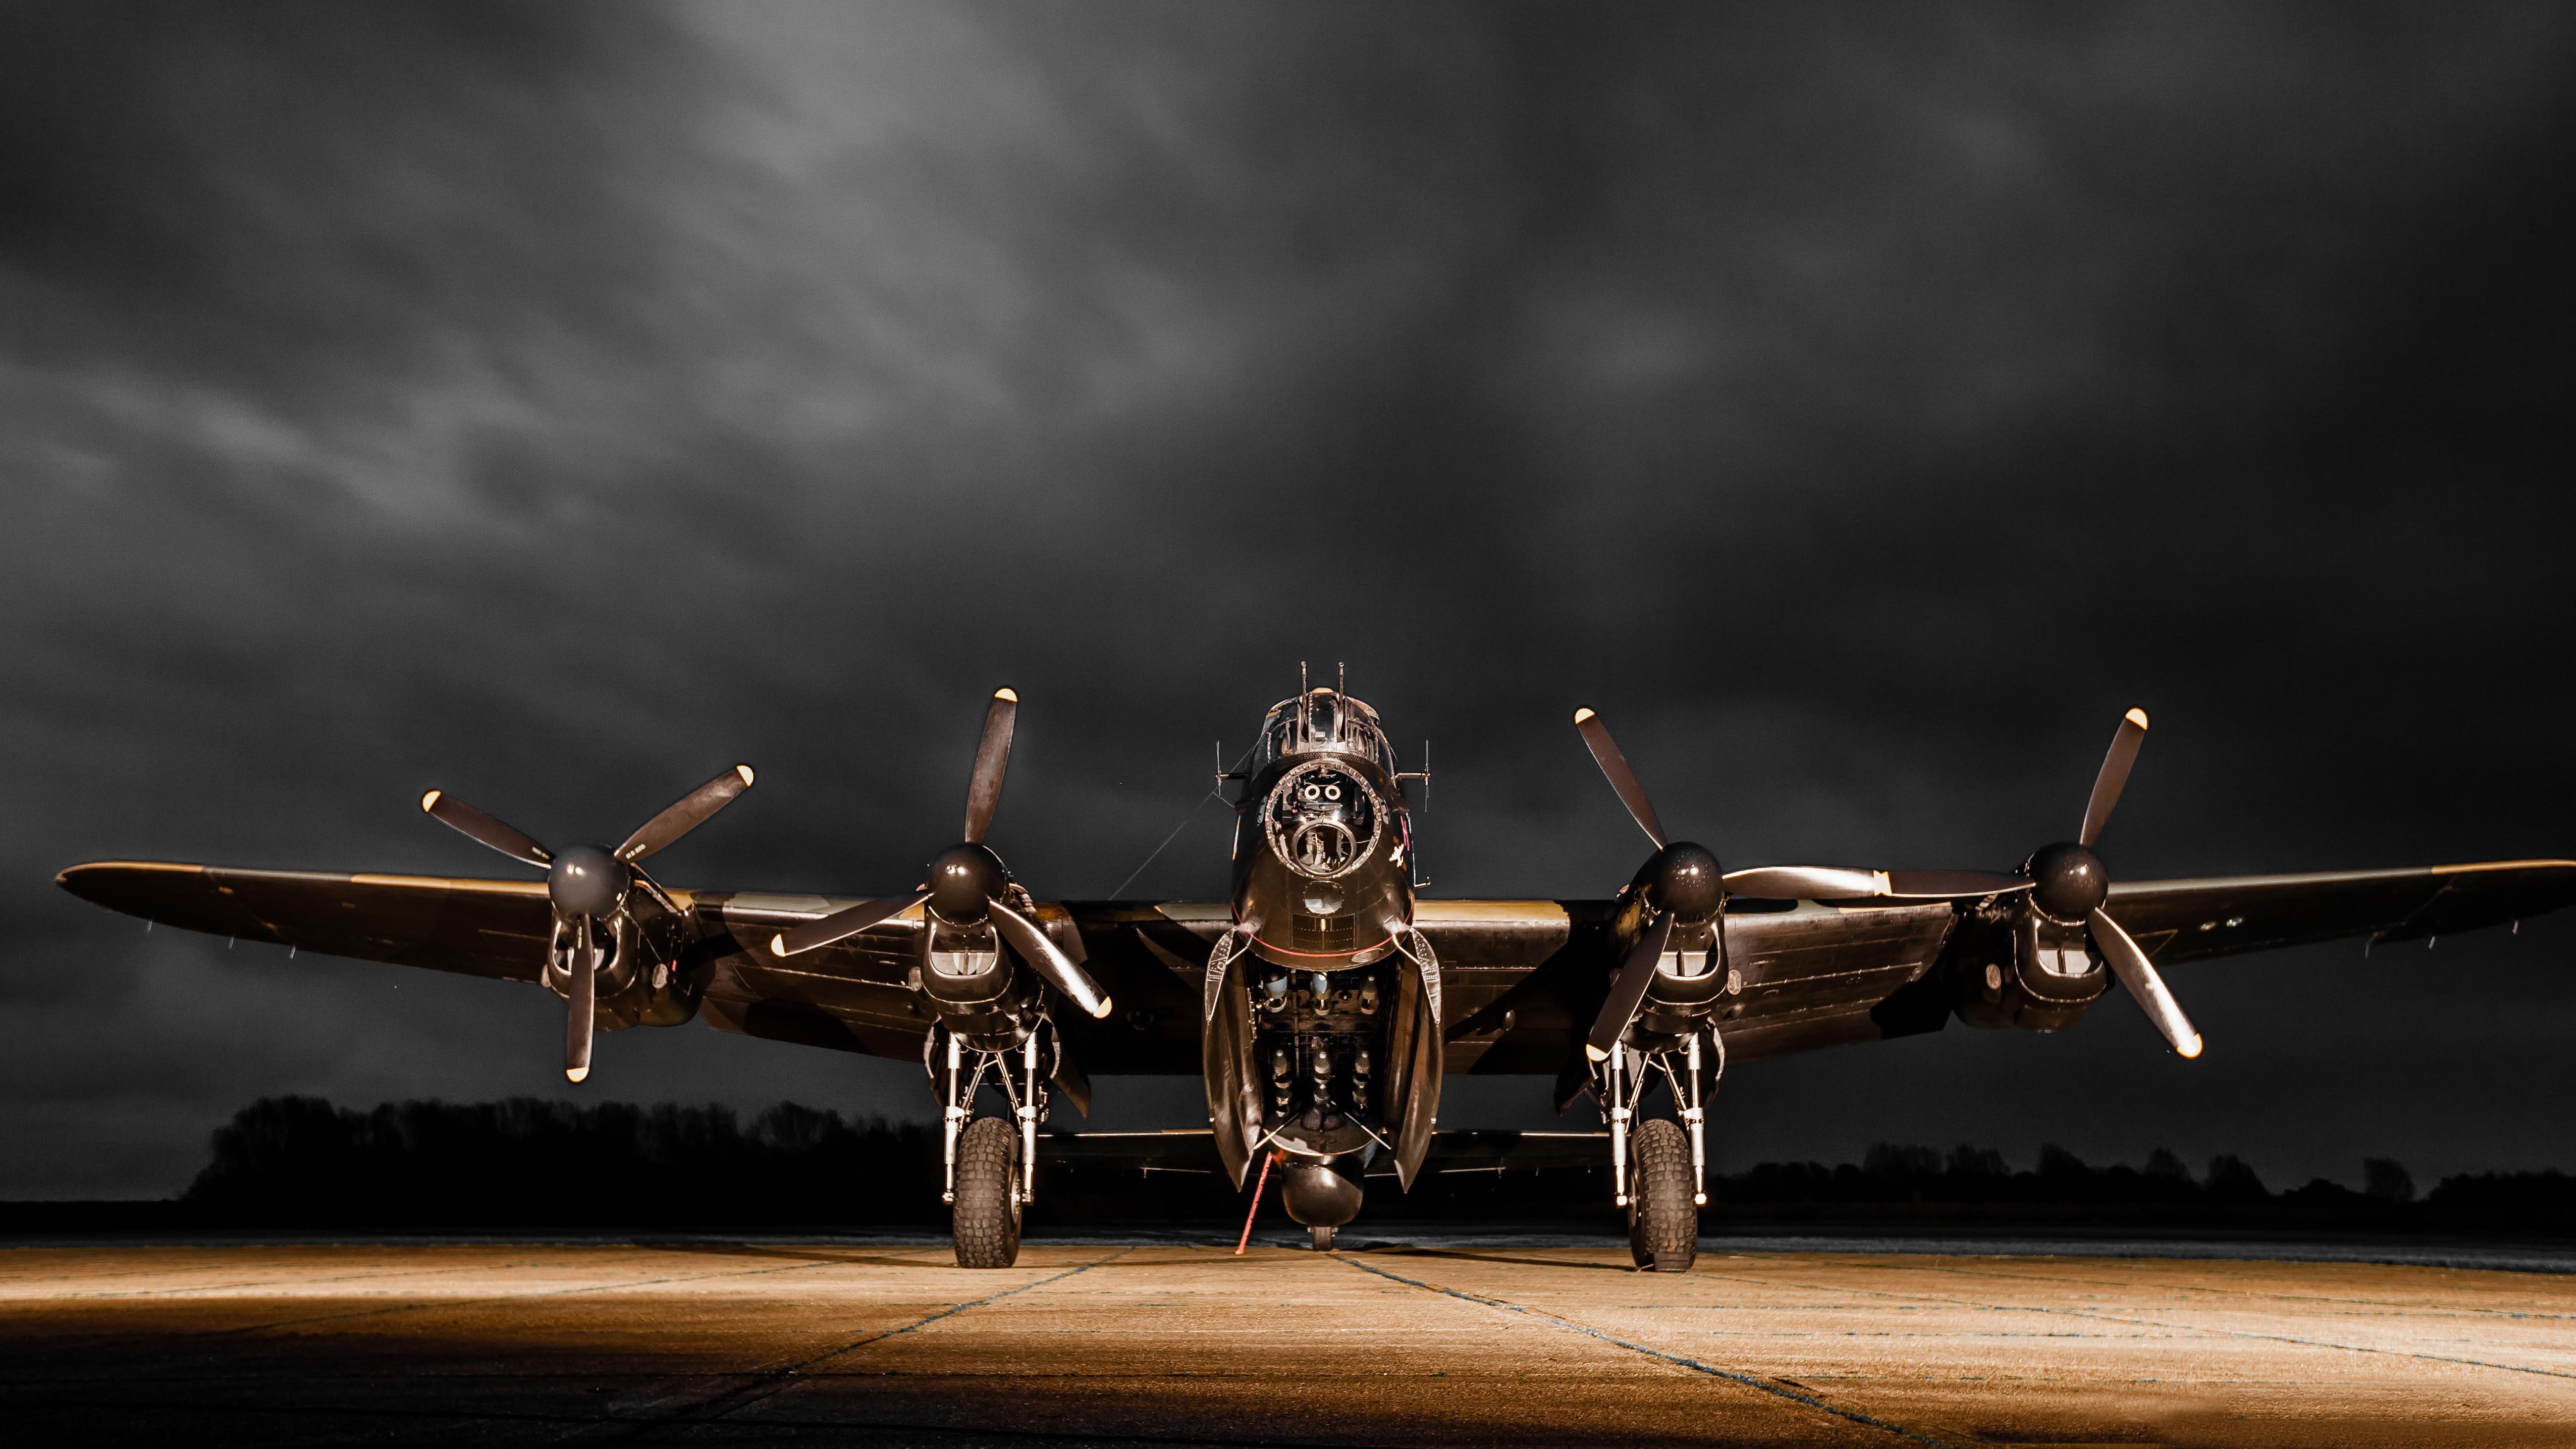 Canadian Lancaster Bomber Wallpaper For Pc, Tablet And Mobile